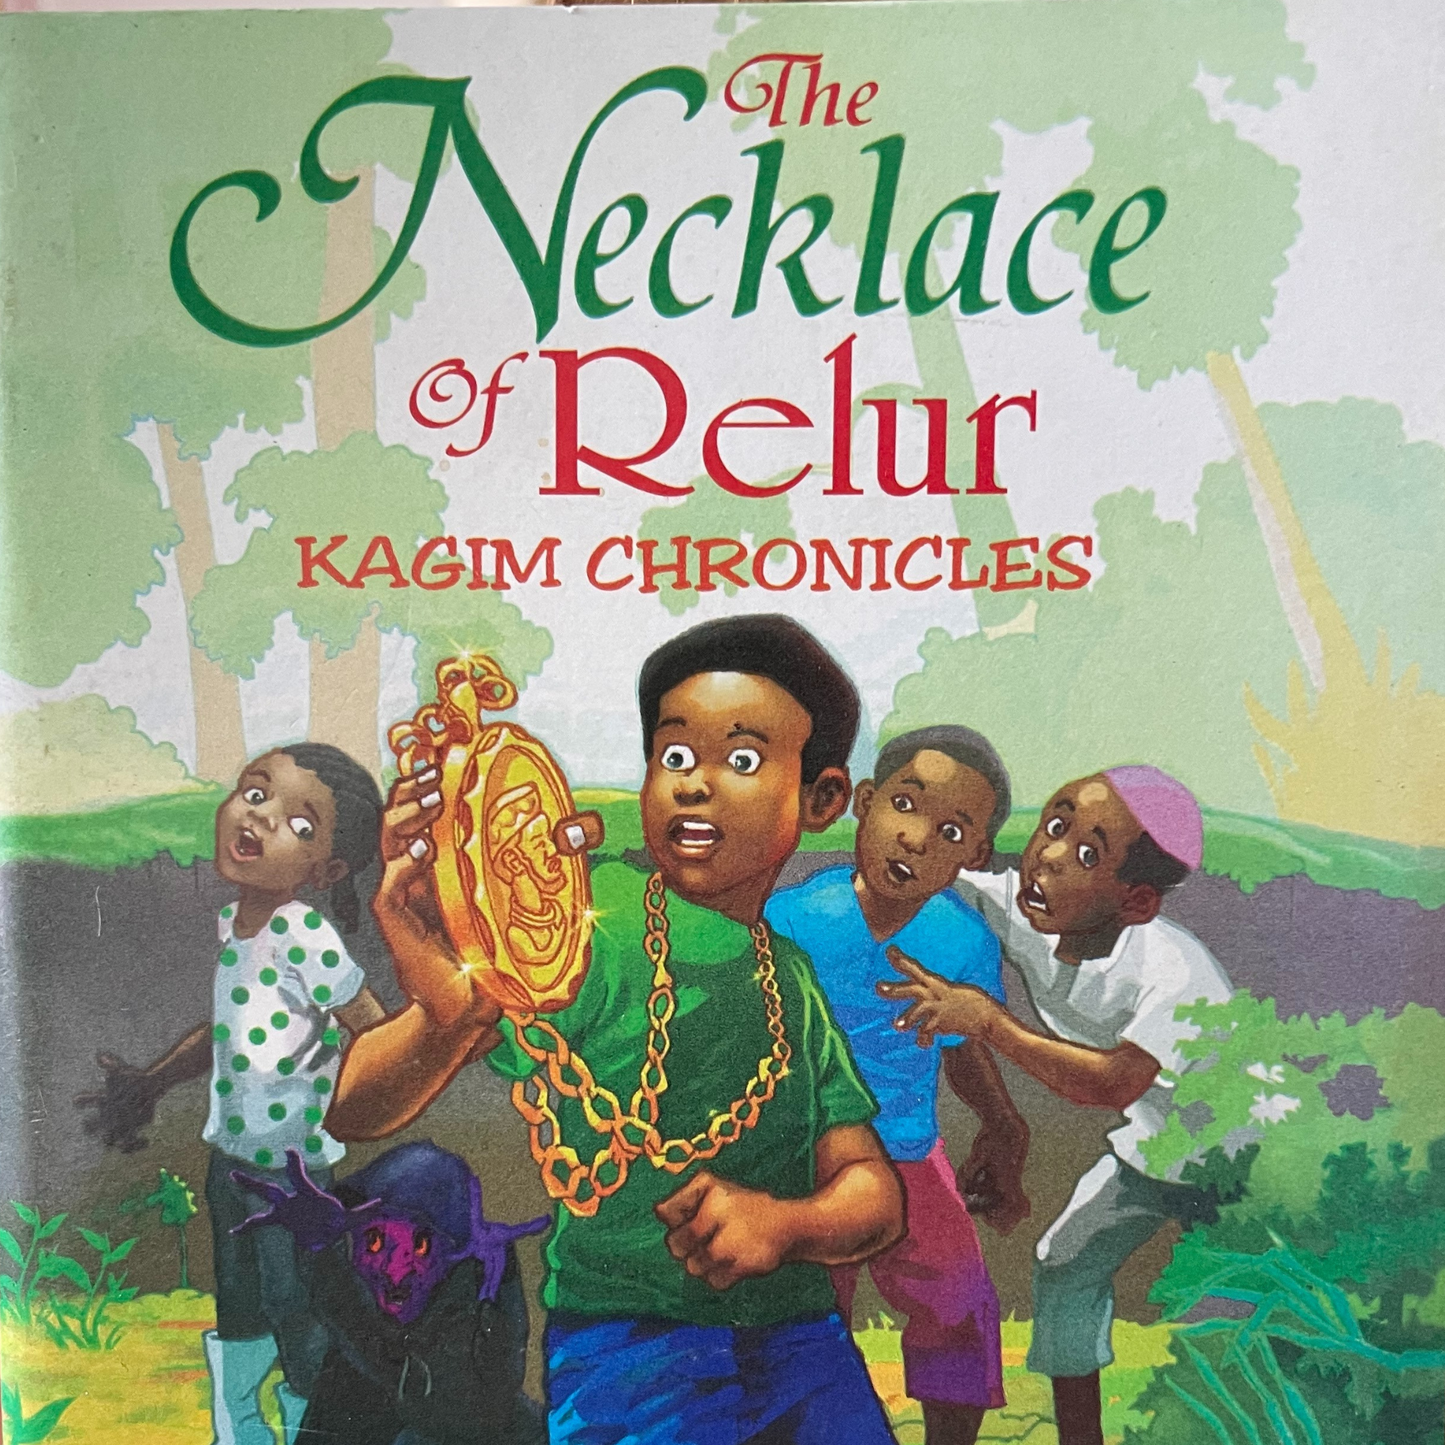 Kagim Chronicles: The Necklace of Relur